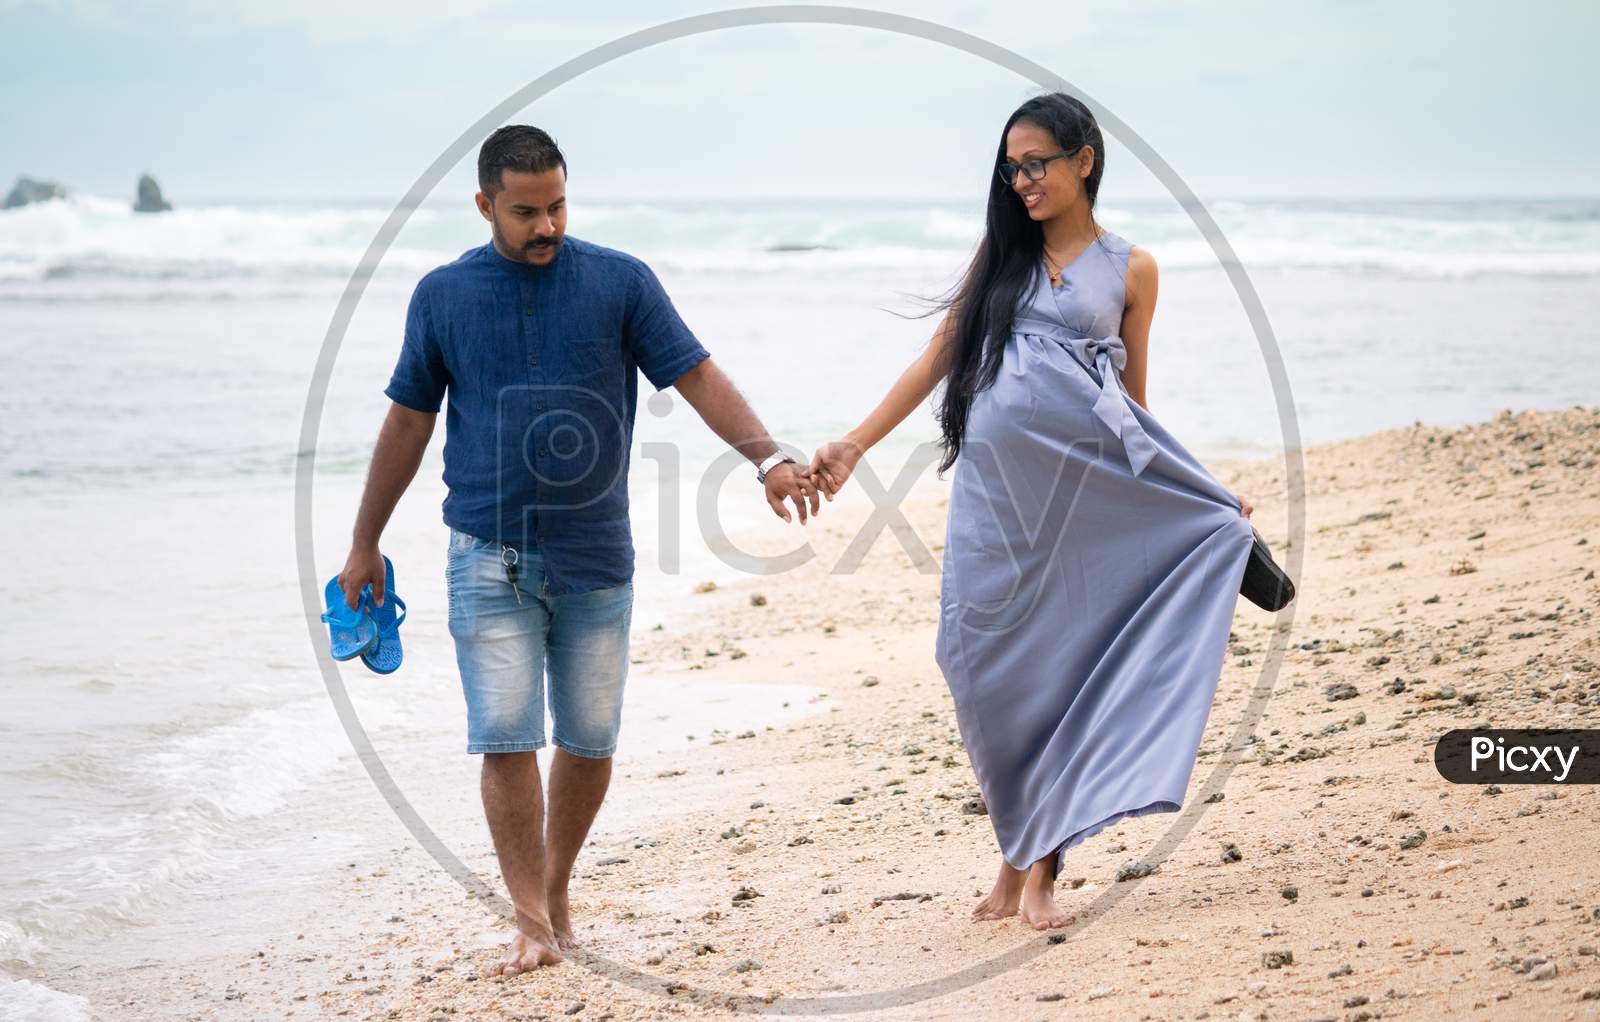 Relaxing And Enjoying Walking On The Beach Barefoot, Happy Couple Holding Hands And Having A Small Discussion, Young And Pregnant, Couple Goals Concept.